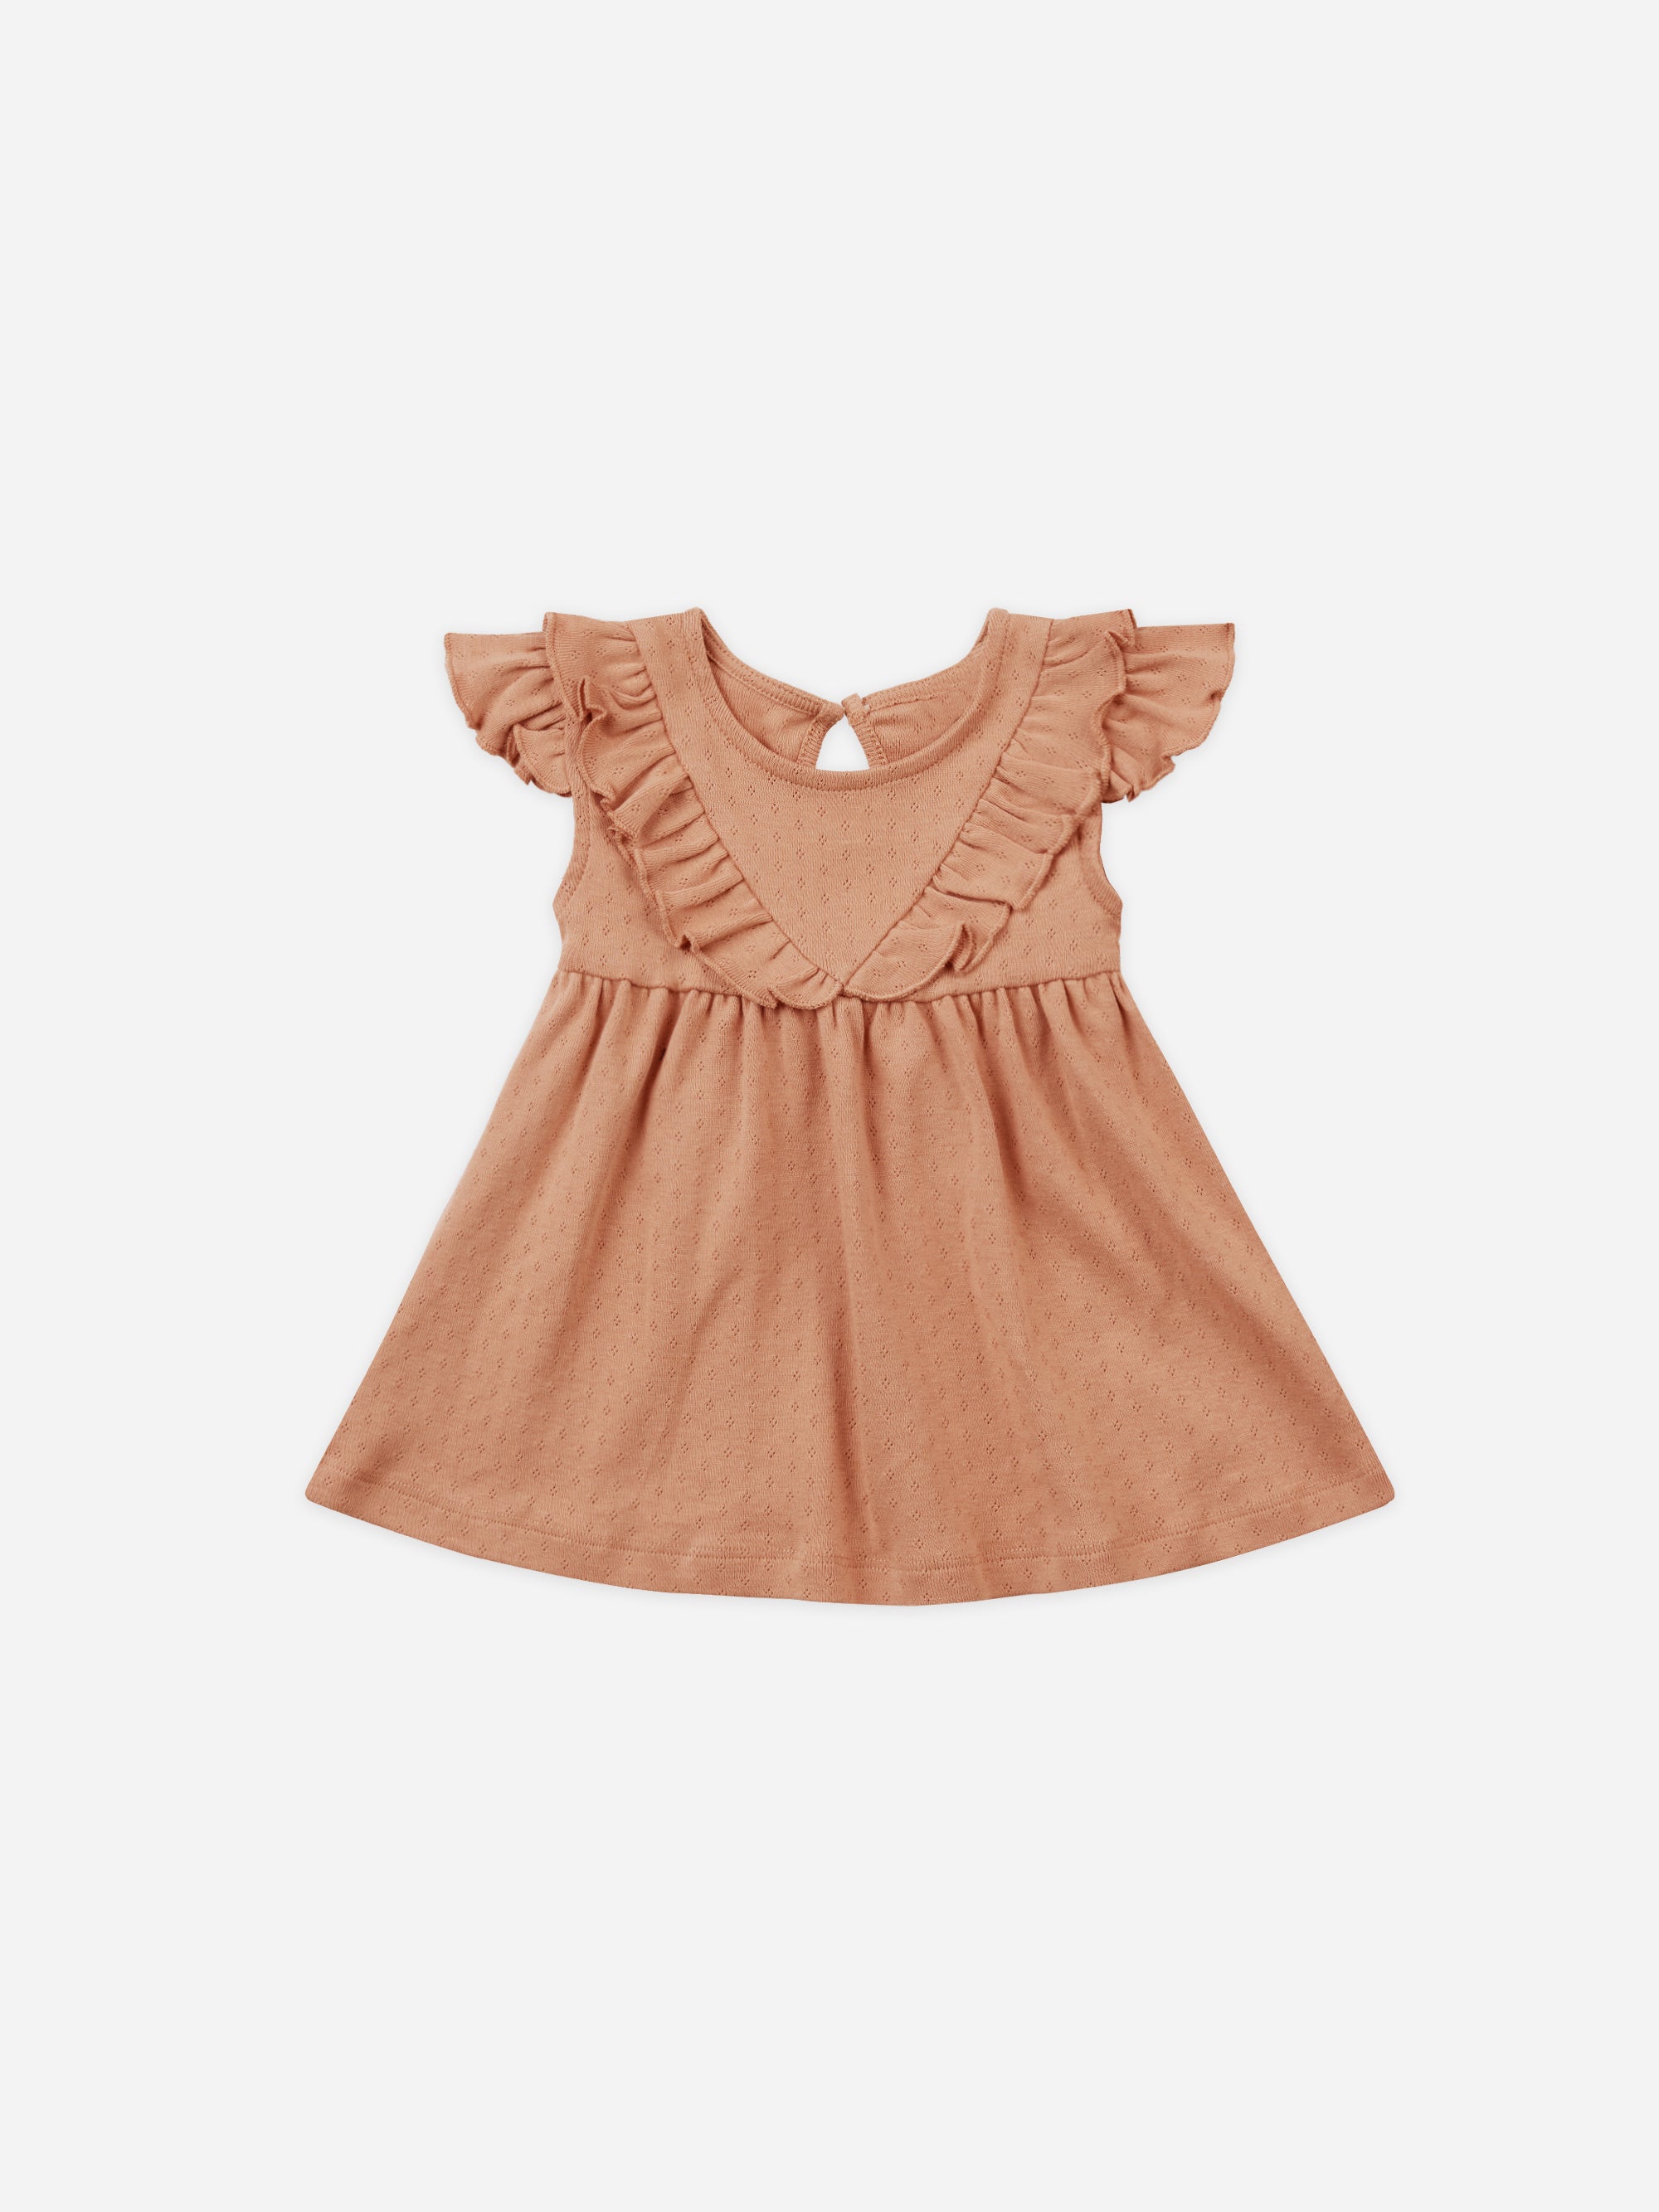 Sleeveless Ruffle V Dress || Melon - Rylee + Cru | Kids Clothes | Trendy Baby Clothes | Modern Infant Outfits |